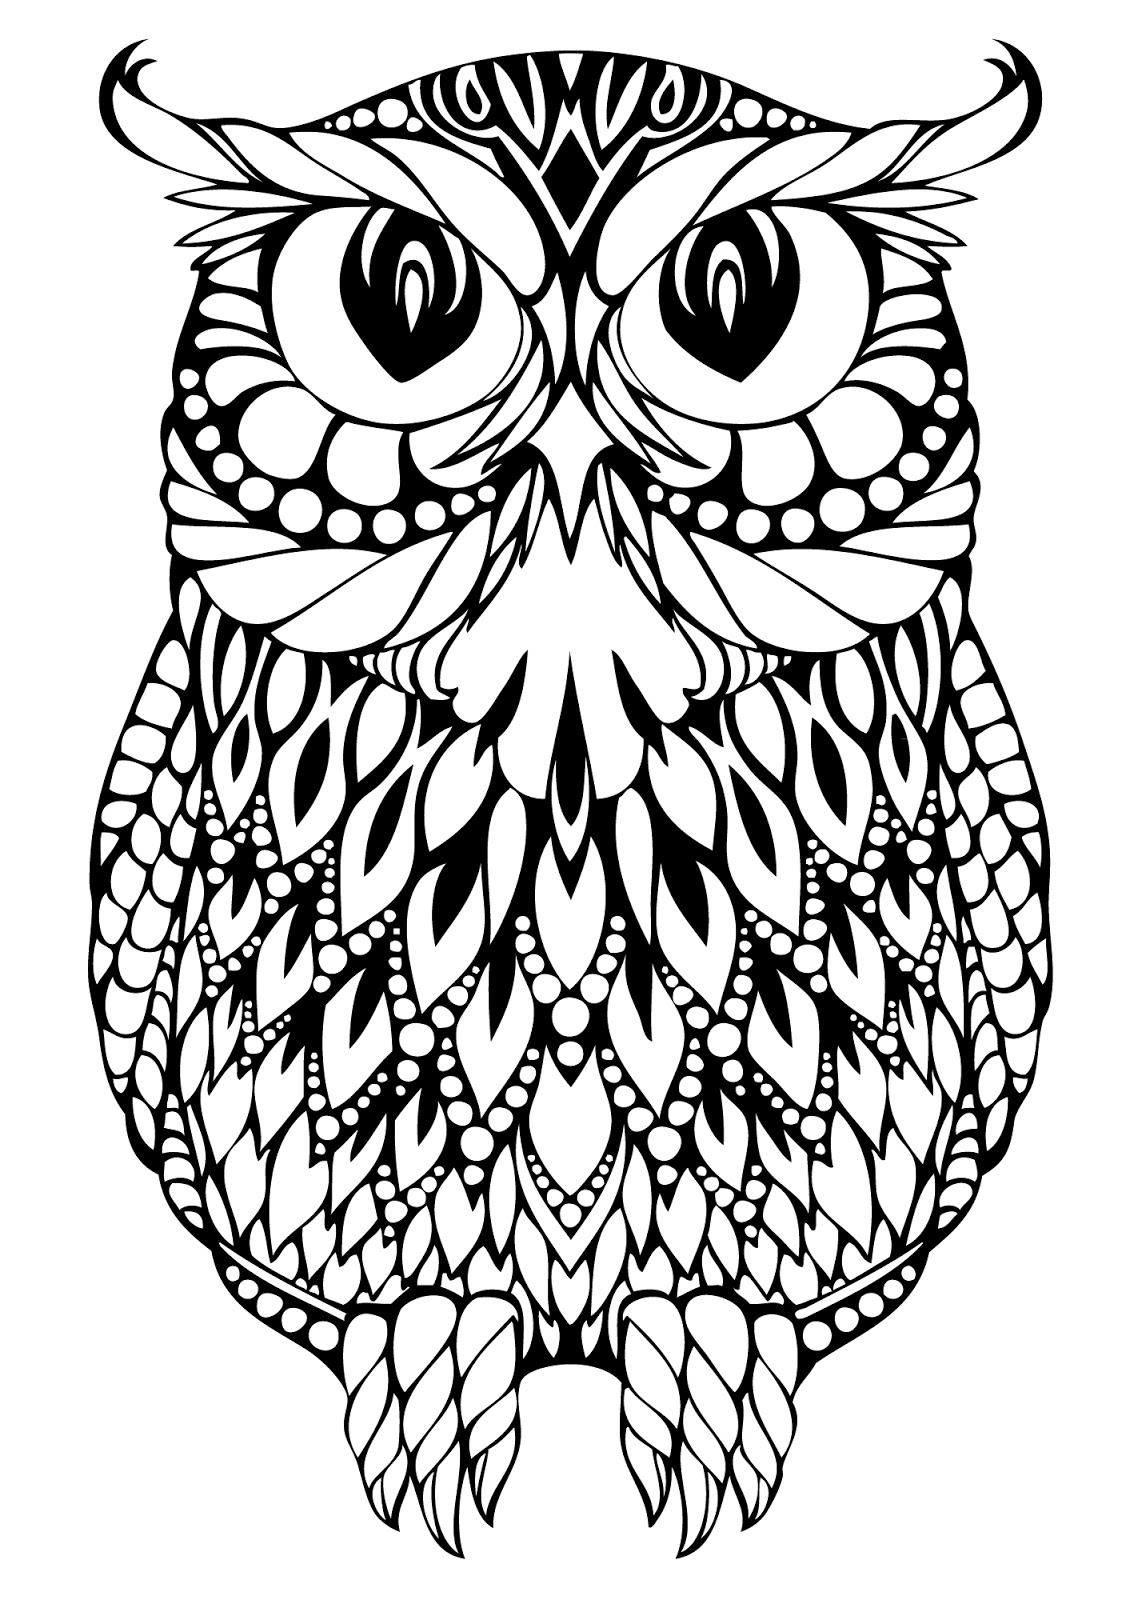 Download Serendipity: Adult Coloring Pages (Printable)